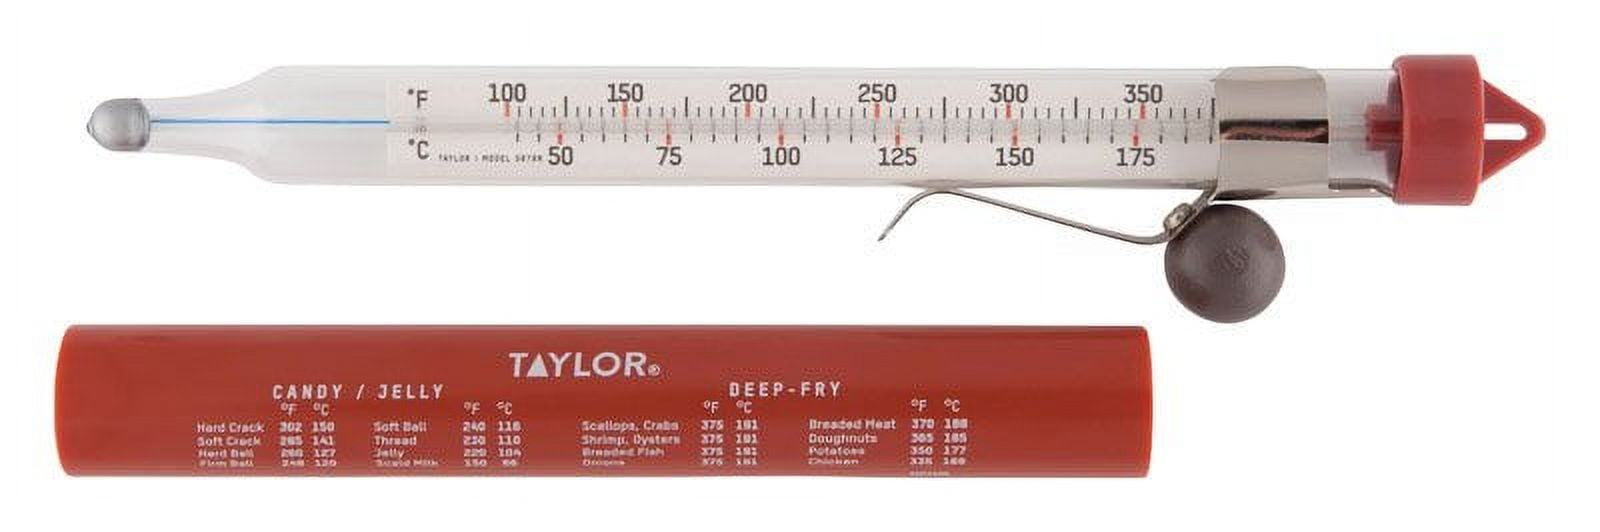 Vintage Taylor Deep Frying Thermometer, Vintage Red Wood Handle Cooking  Thermometer, Red Handled Retro Farmhouse Kitchen Tool With Box 